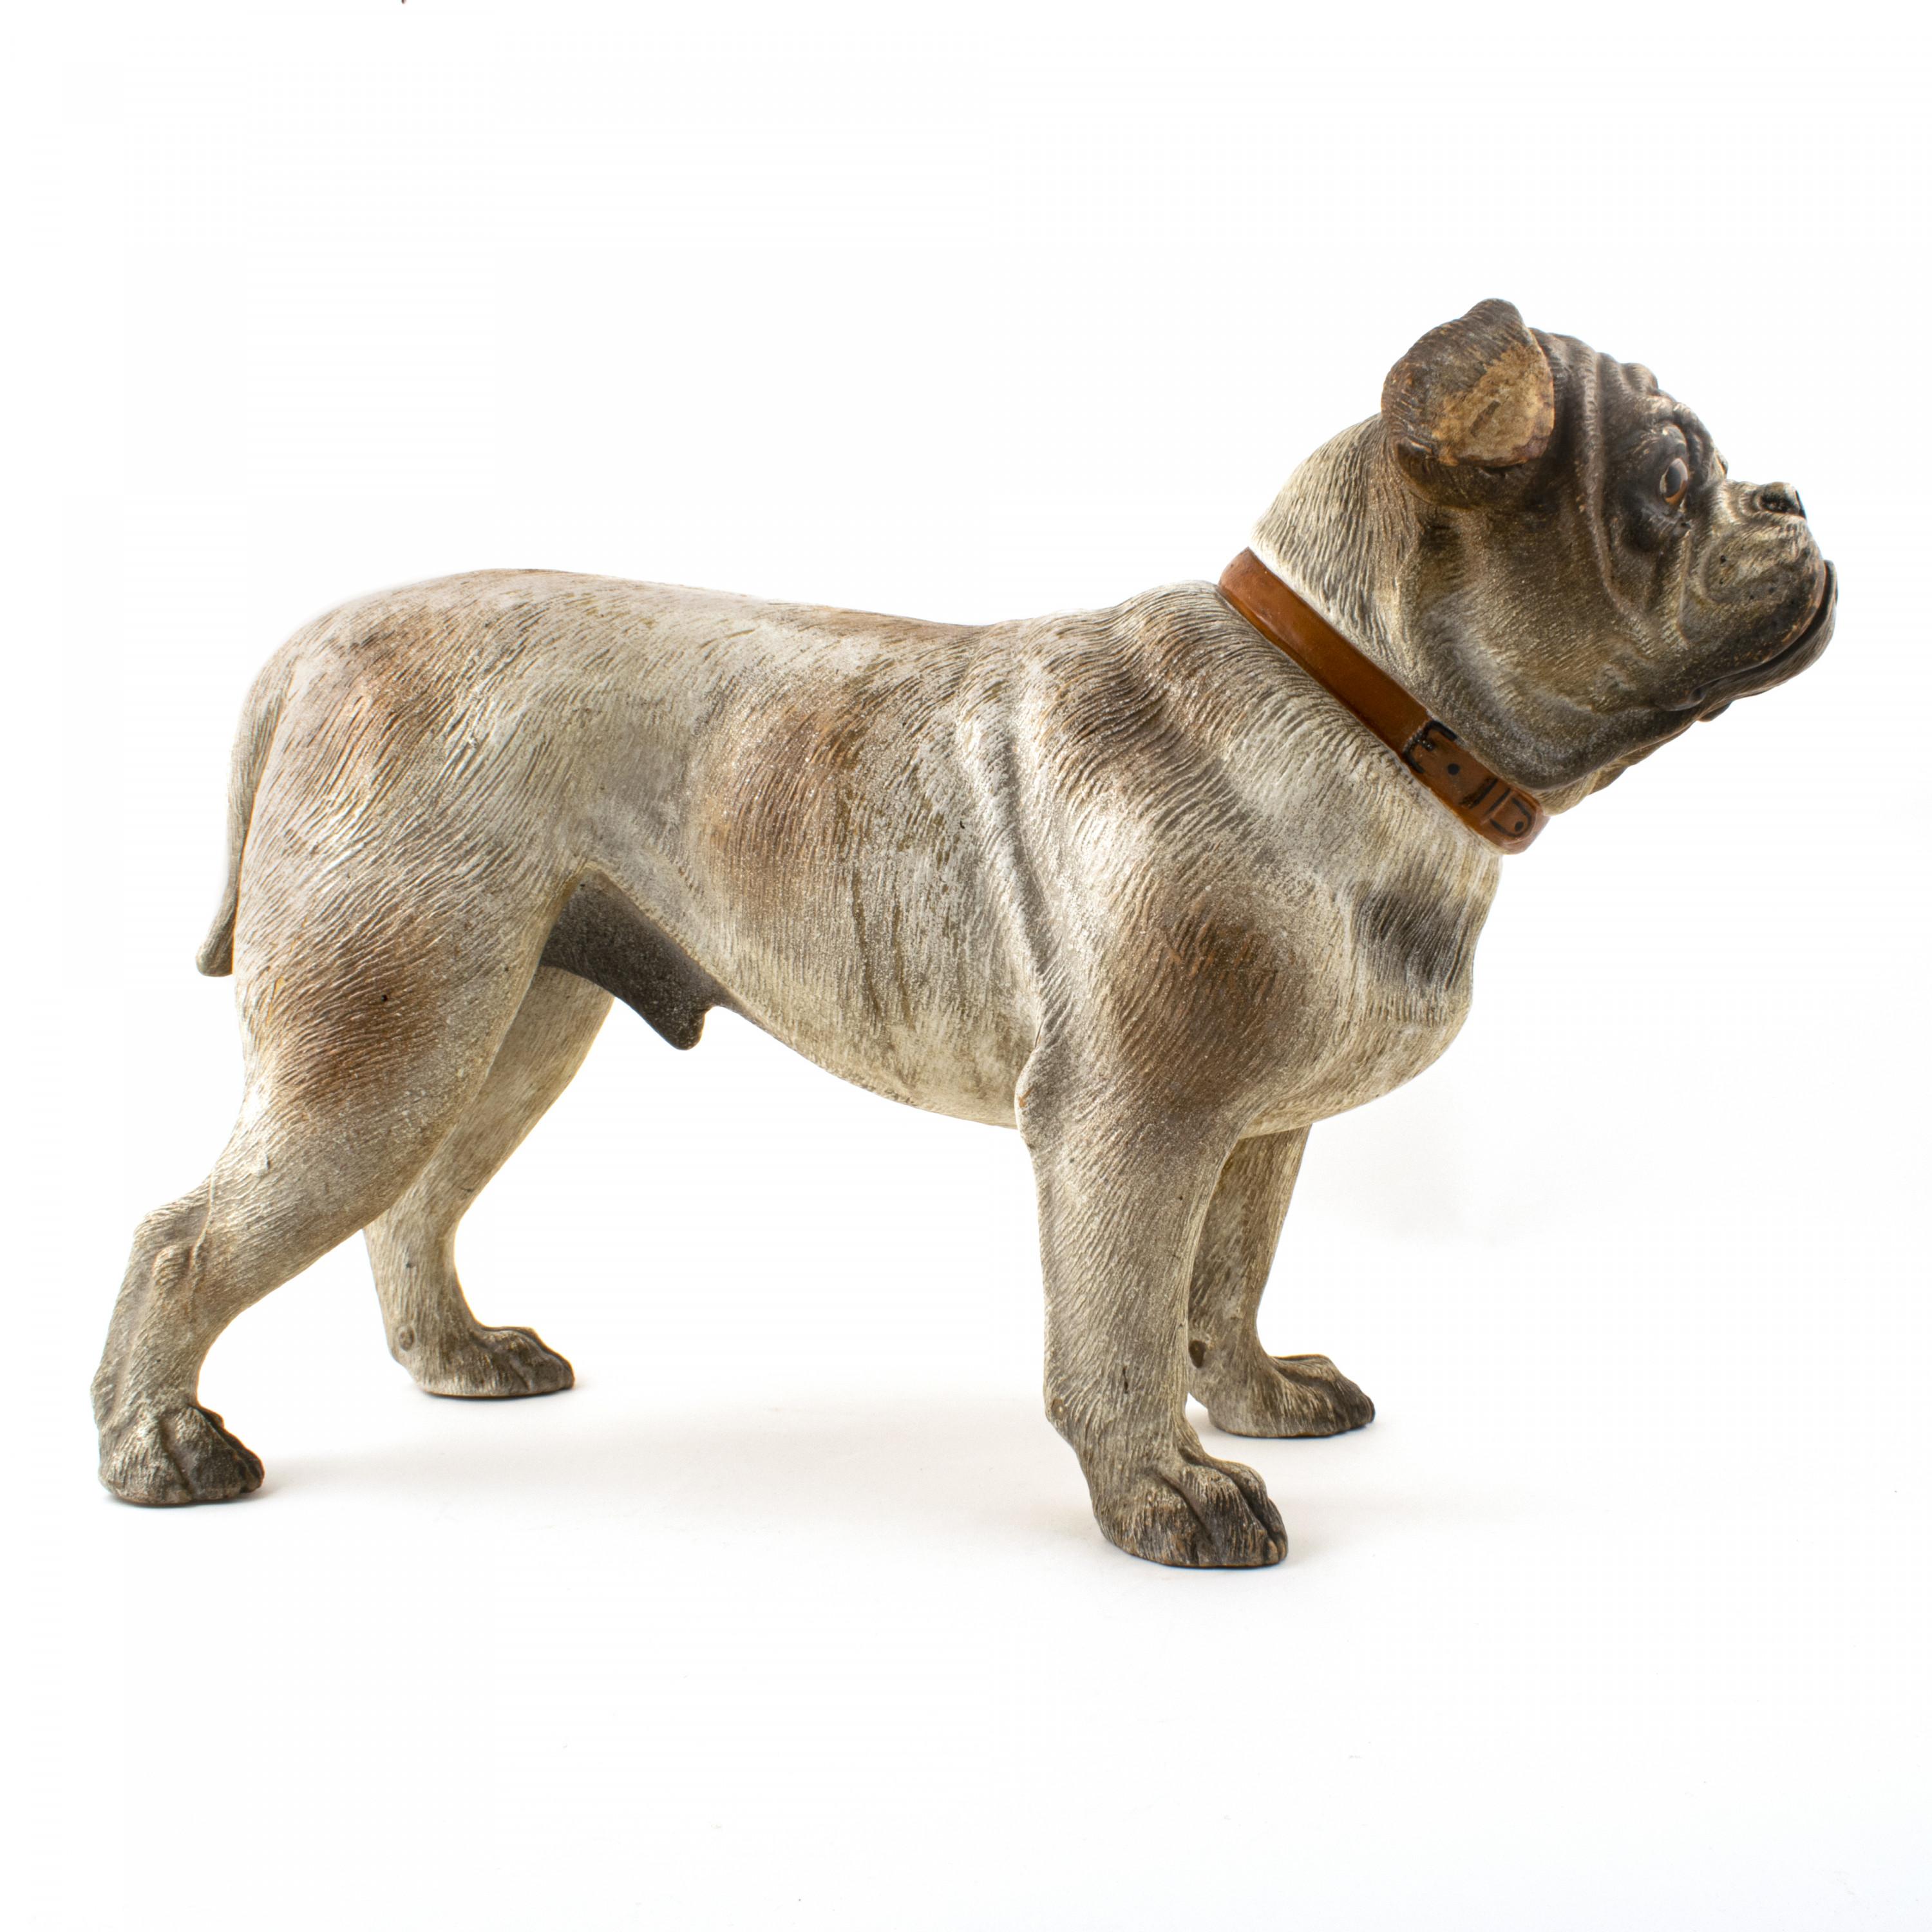 Austrian cold painted terracotta model of a bulldog in standing position.
Nice decorative collector’s item in very realistic and naturalistically cold painted terracotta with collar and inset glass eyes
Austria, early 20th century.